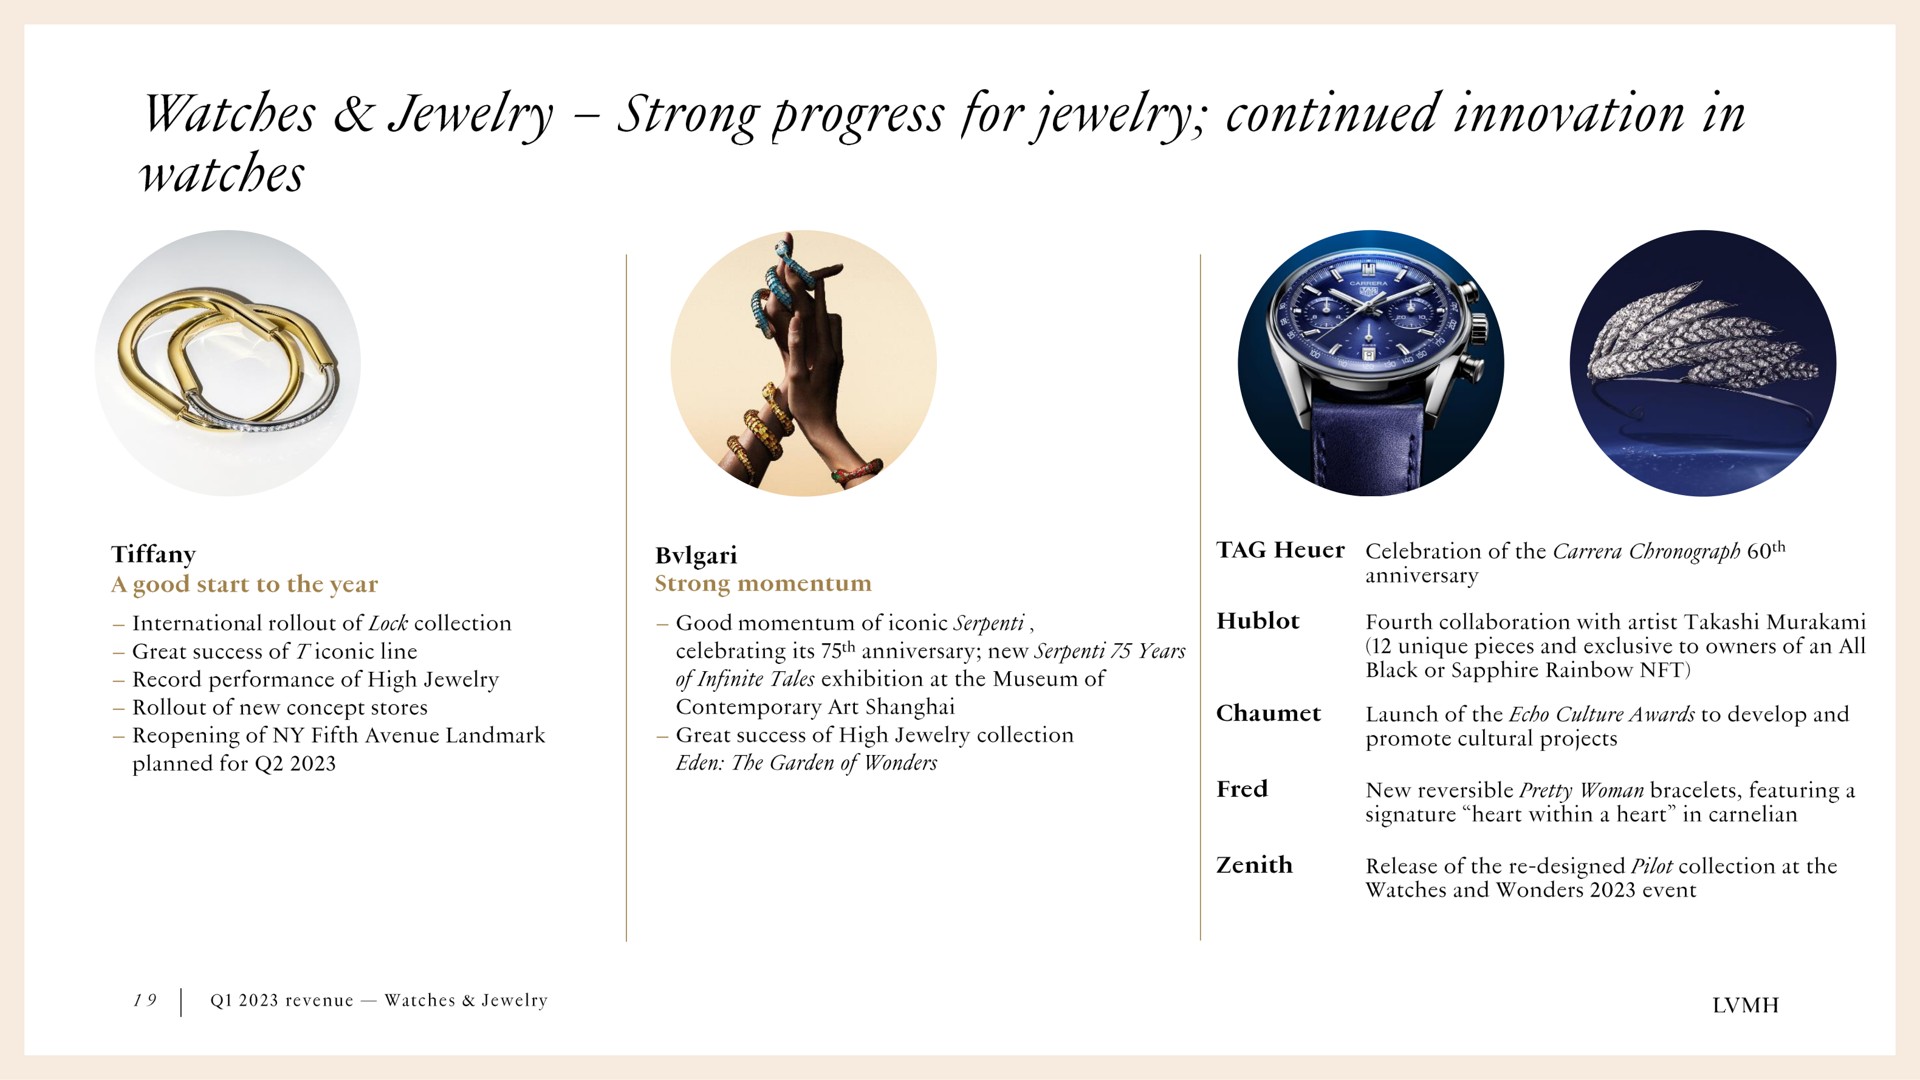 watches jewelry strong progress for jewelry continued innovation in watches | LVMH